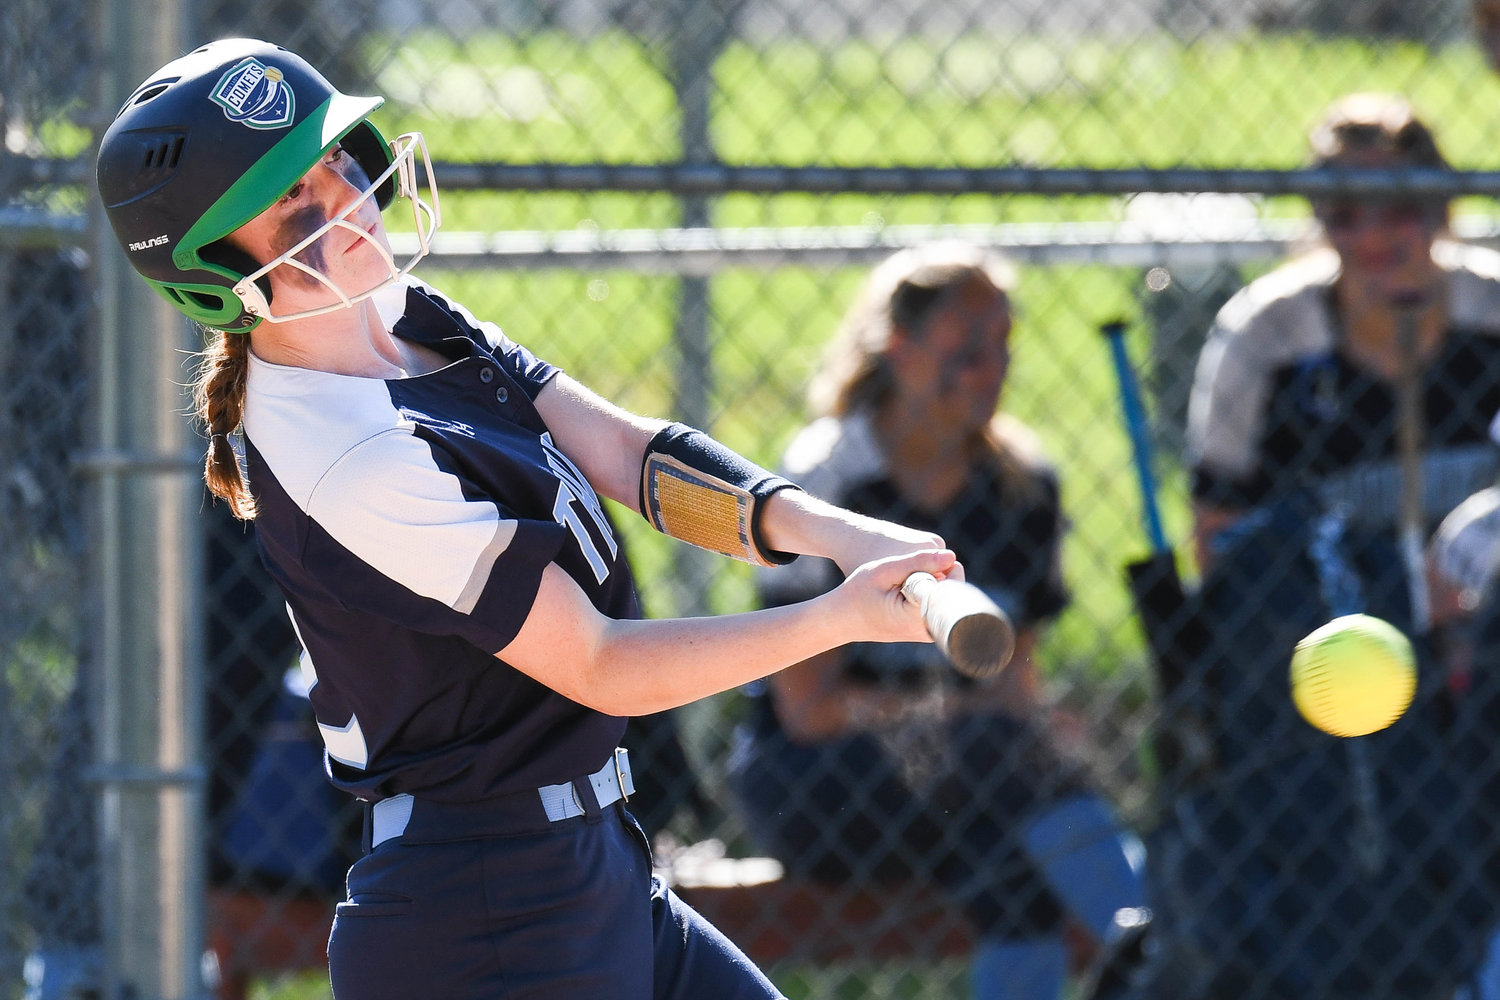 Central Valley Academy’s Madison Obreza, shown during the softball season in May, was a multi-sport athlete in high school. She also played soccer and basketball for CVA.